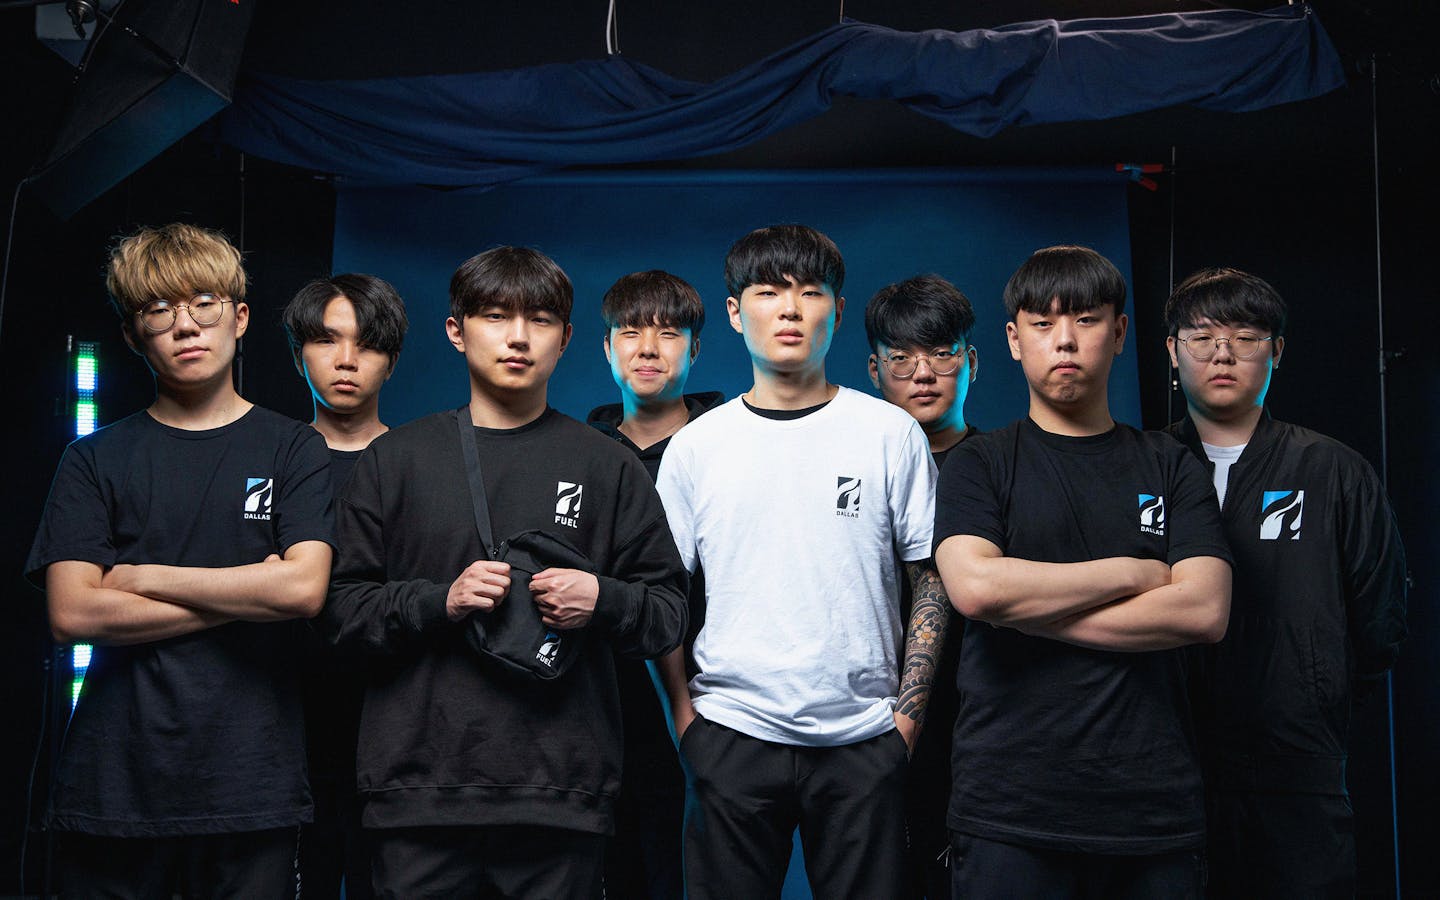 Meet the Team of South Korean Pro Gamers who Moved to Dallas to